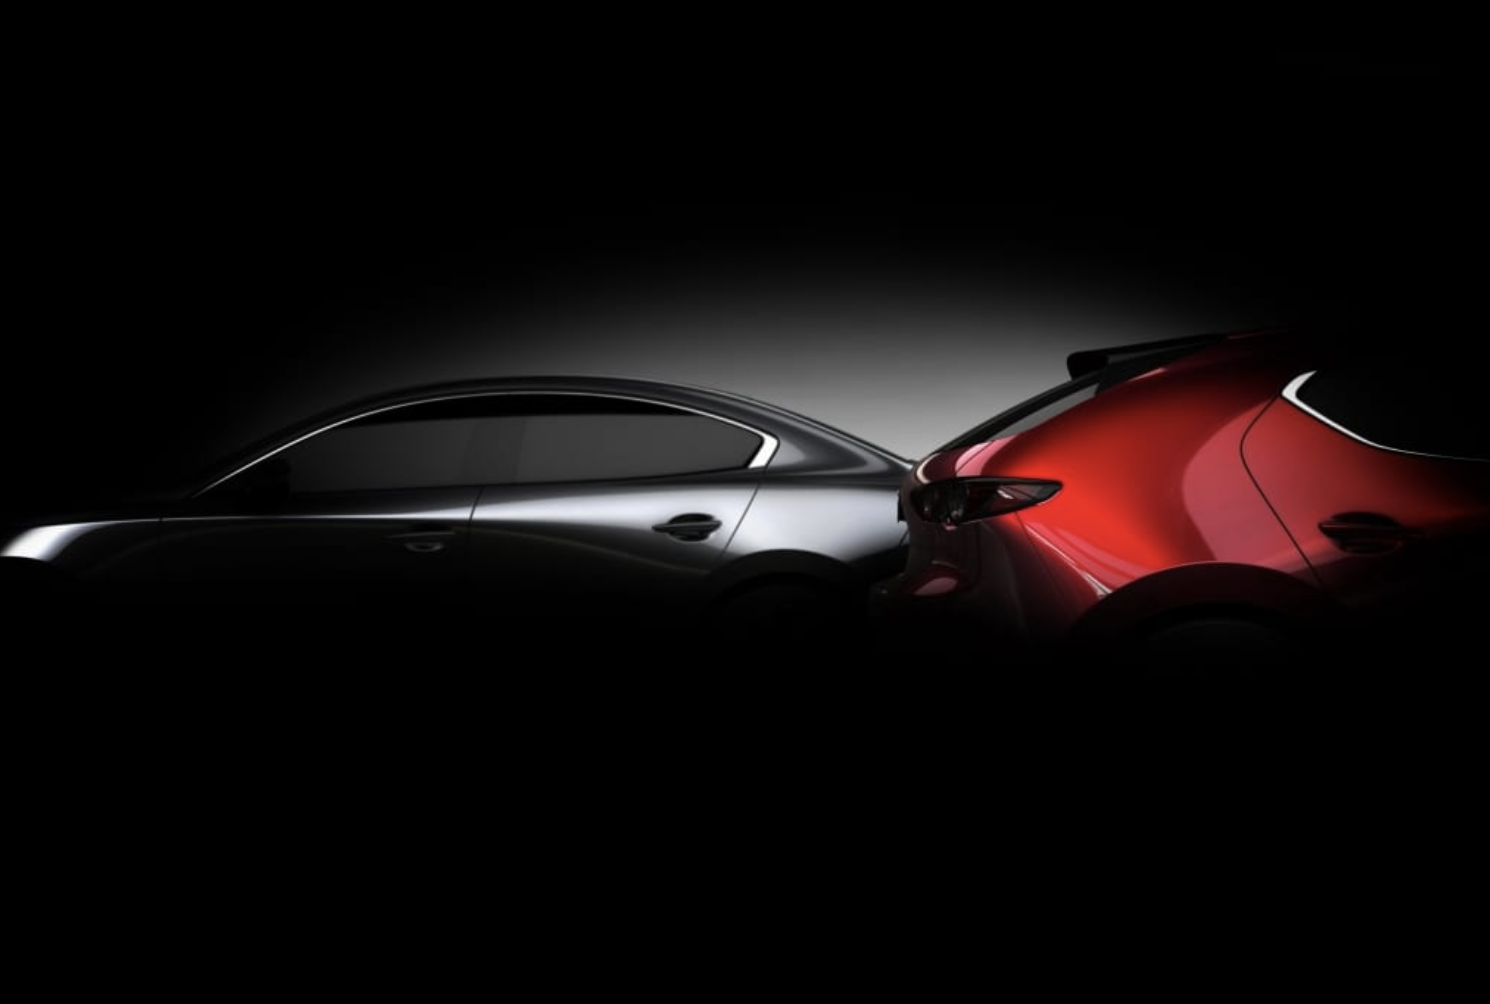 New Mazda3 Teased Ahead of L.A. Debut